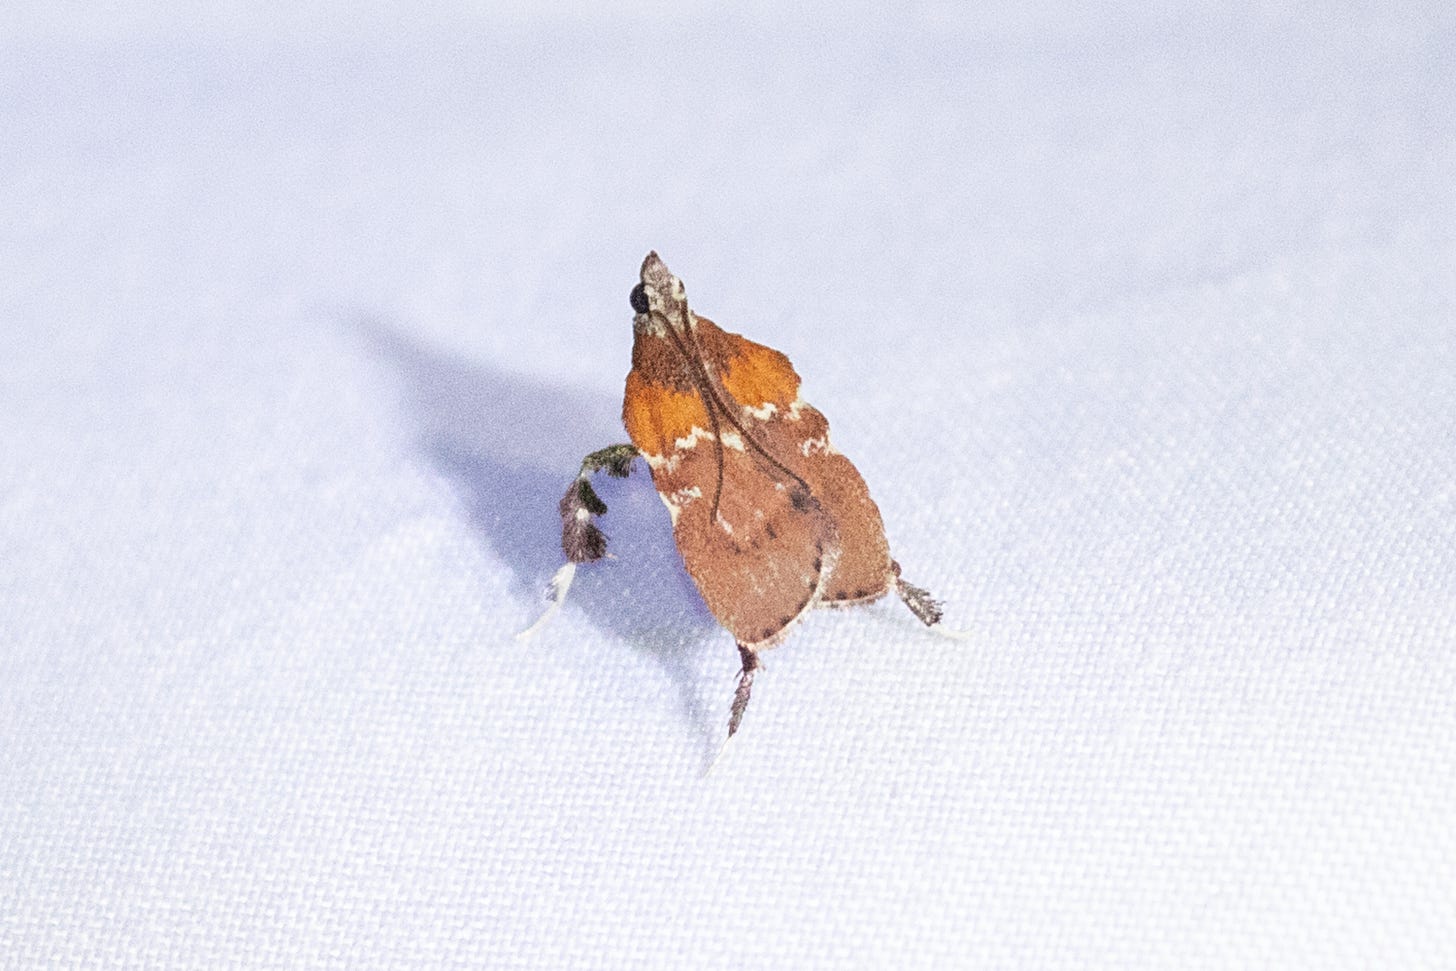 a moth standing on a sheet, its front legs longer than its hind legs making it look like it's doing downard dog or something. its top half is orange, separated by a white zig zag from its brown bottom half. it has a pointed snout and long swept-back antennae.